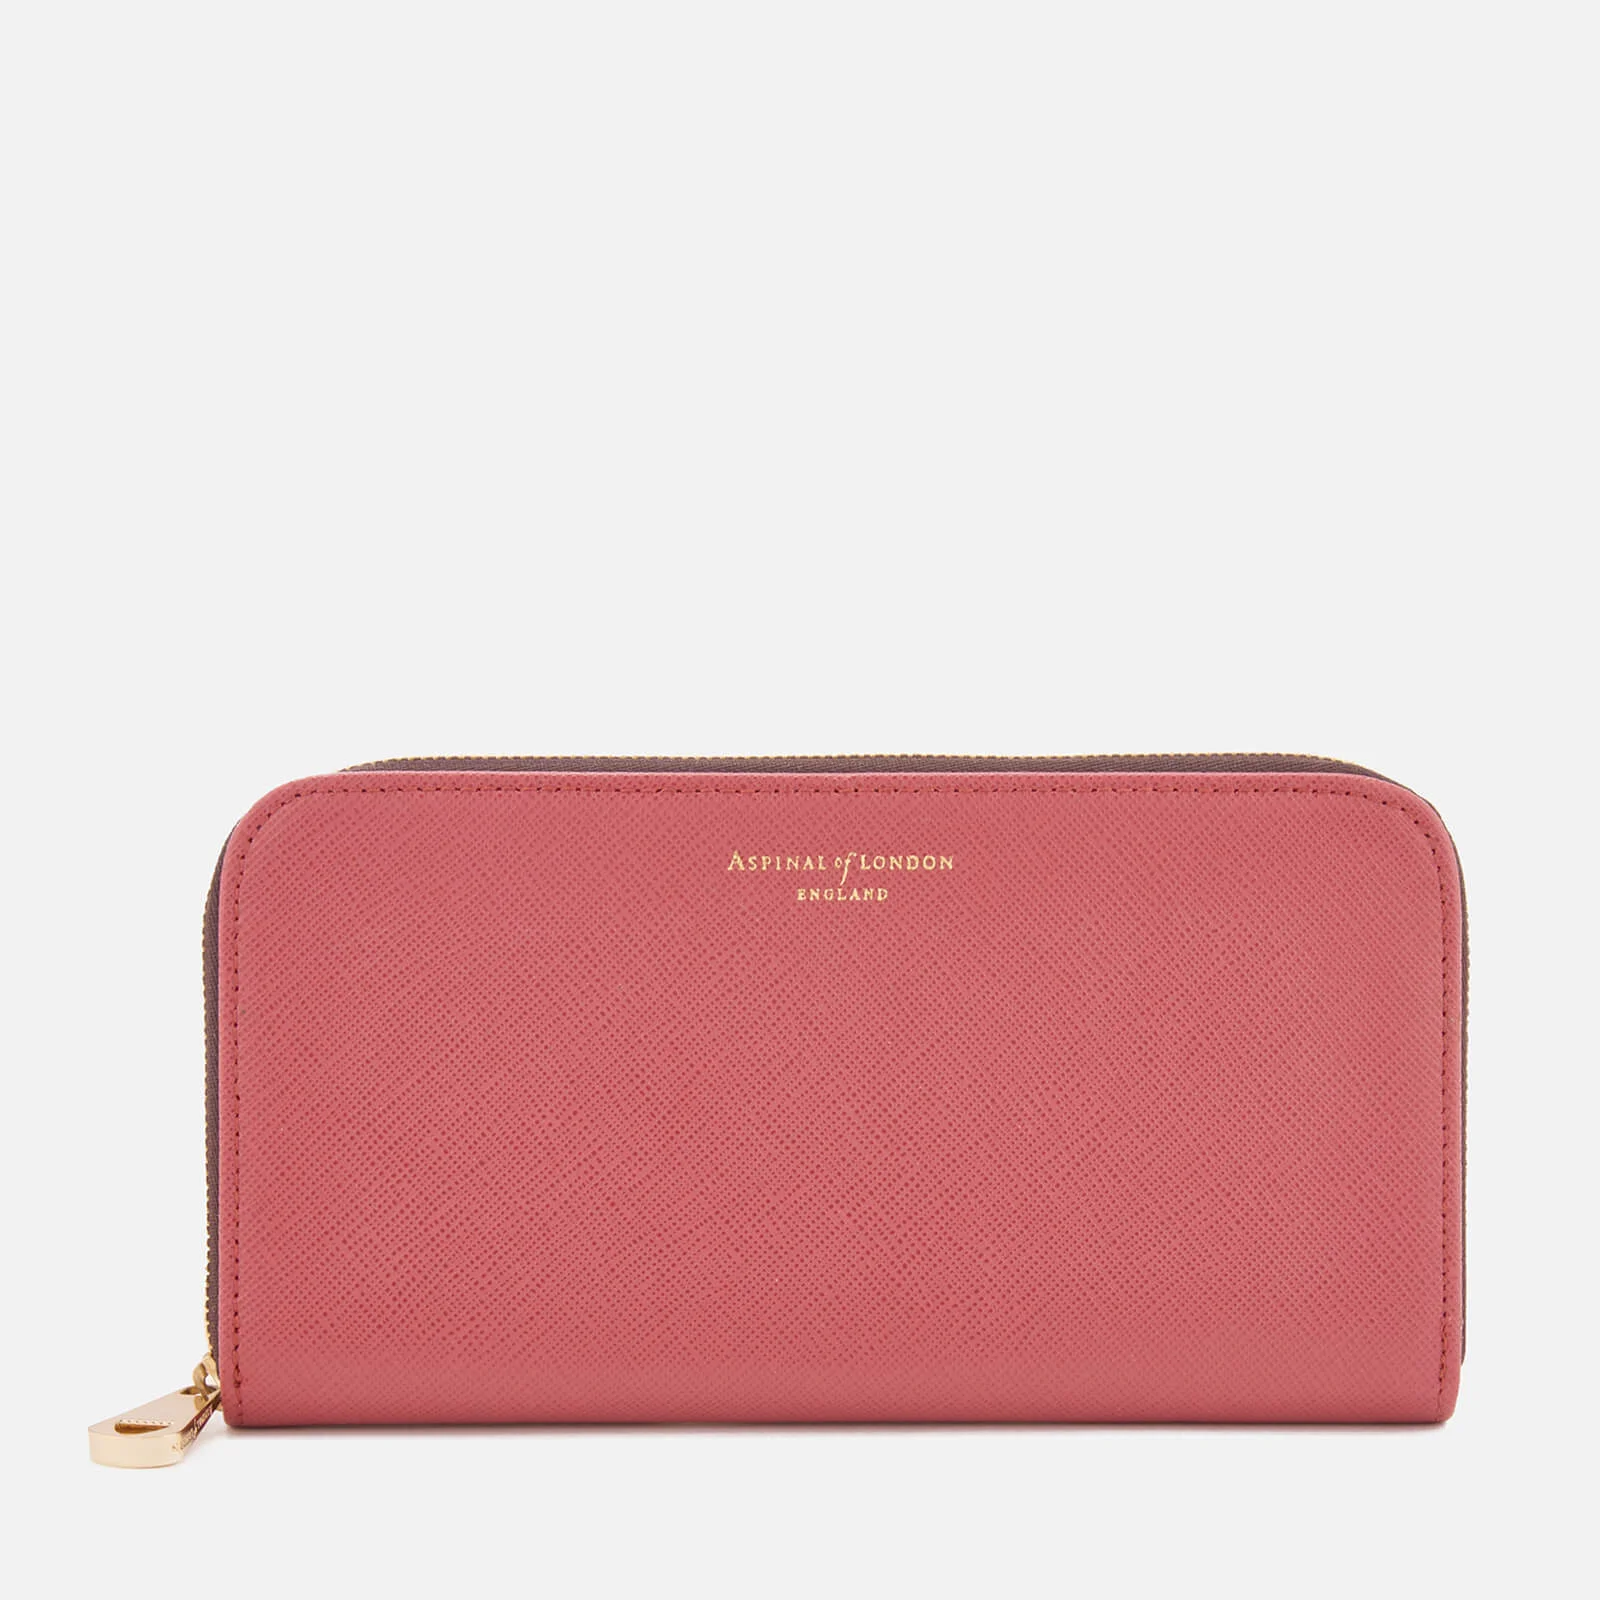 Aspinal of London Women's Continental Clutch Wallet - Blusher Image 1